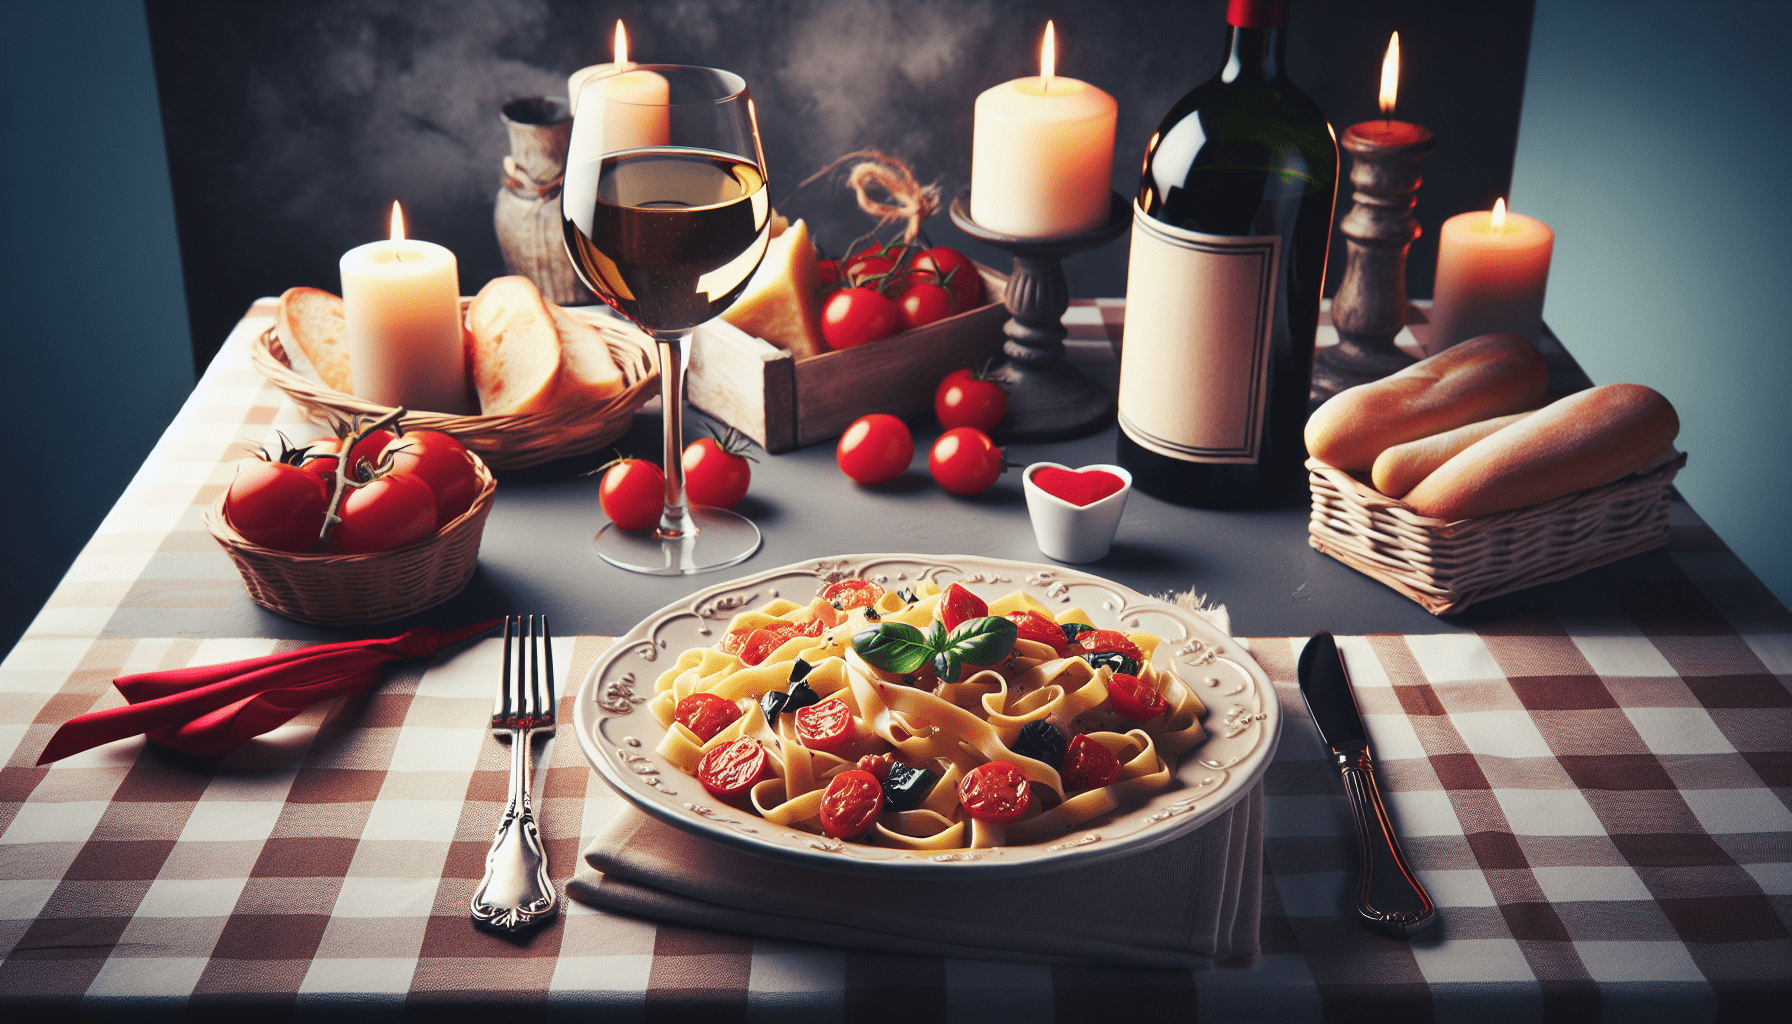 Can You Recommend An Italian Pasta Recipe Thats Perfect For A Date Night?